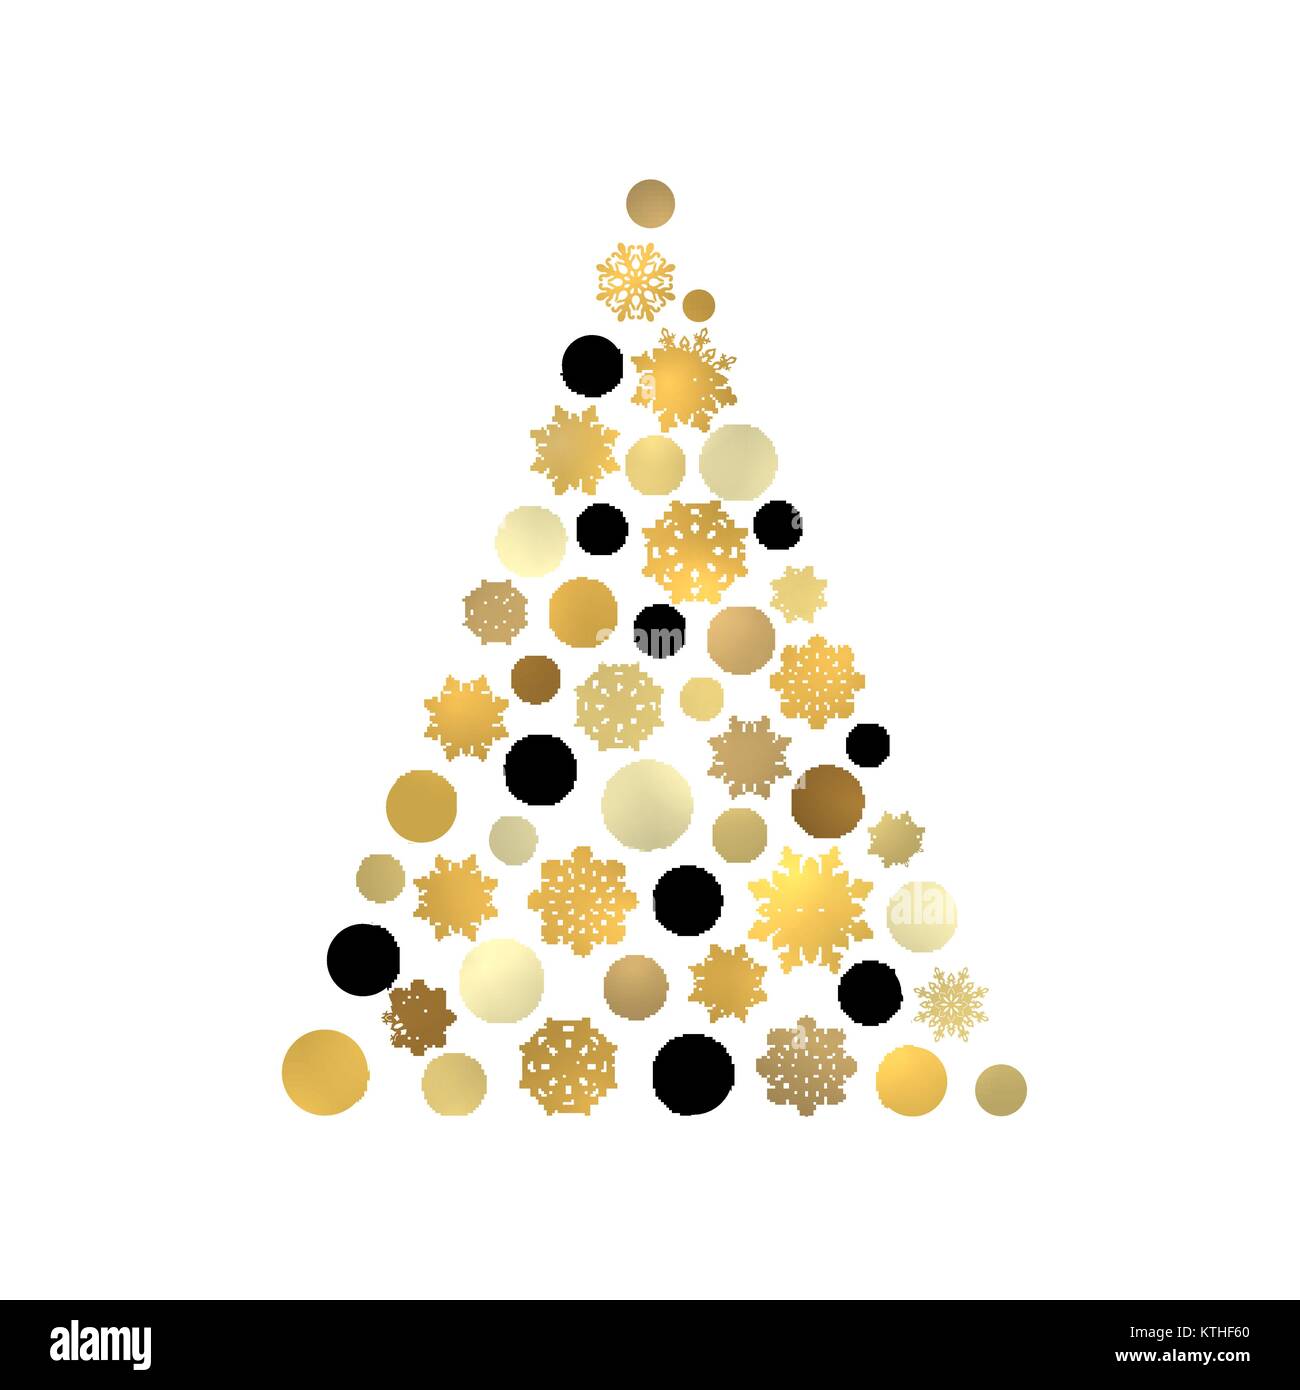 Stylized Christmas tree isolated on white background with gold and black circles and snowflakes. Stylish Xmas card with golden balls. Seasons greetings vector card. Font illustration. Stock Vector